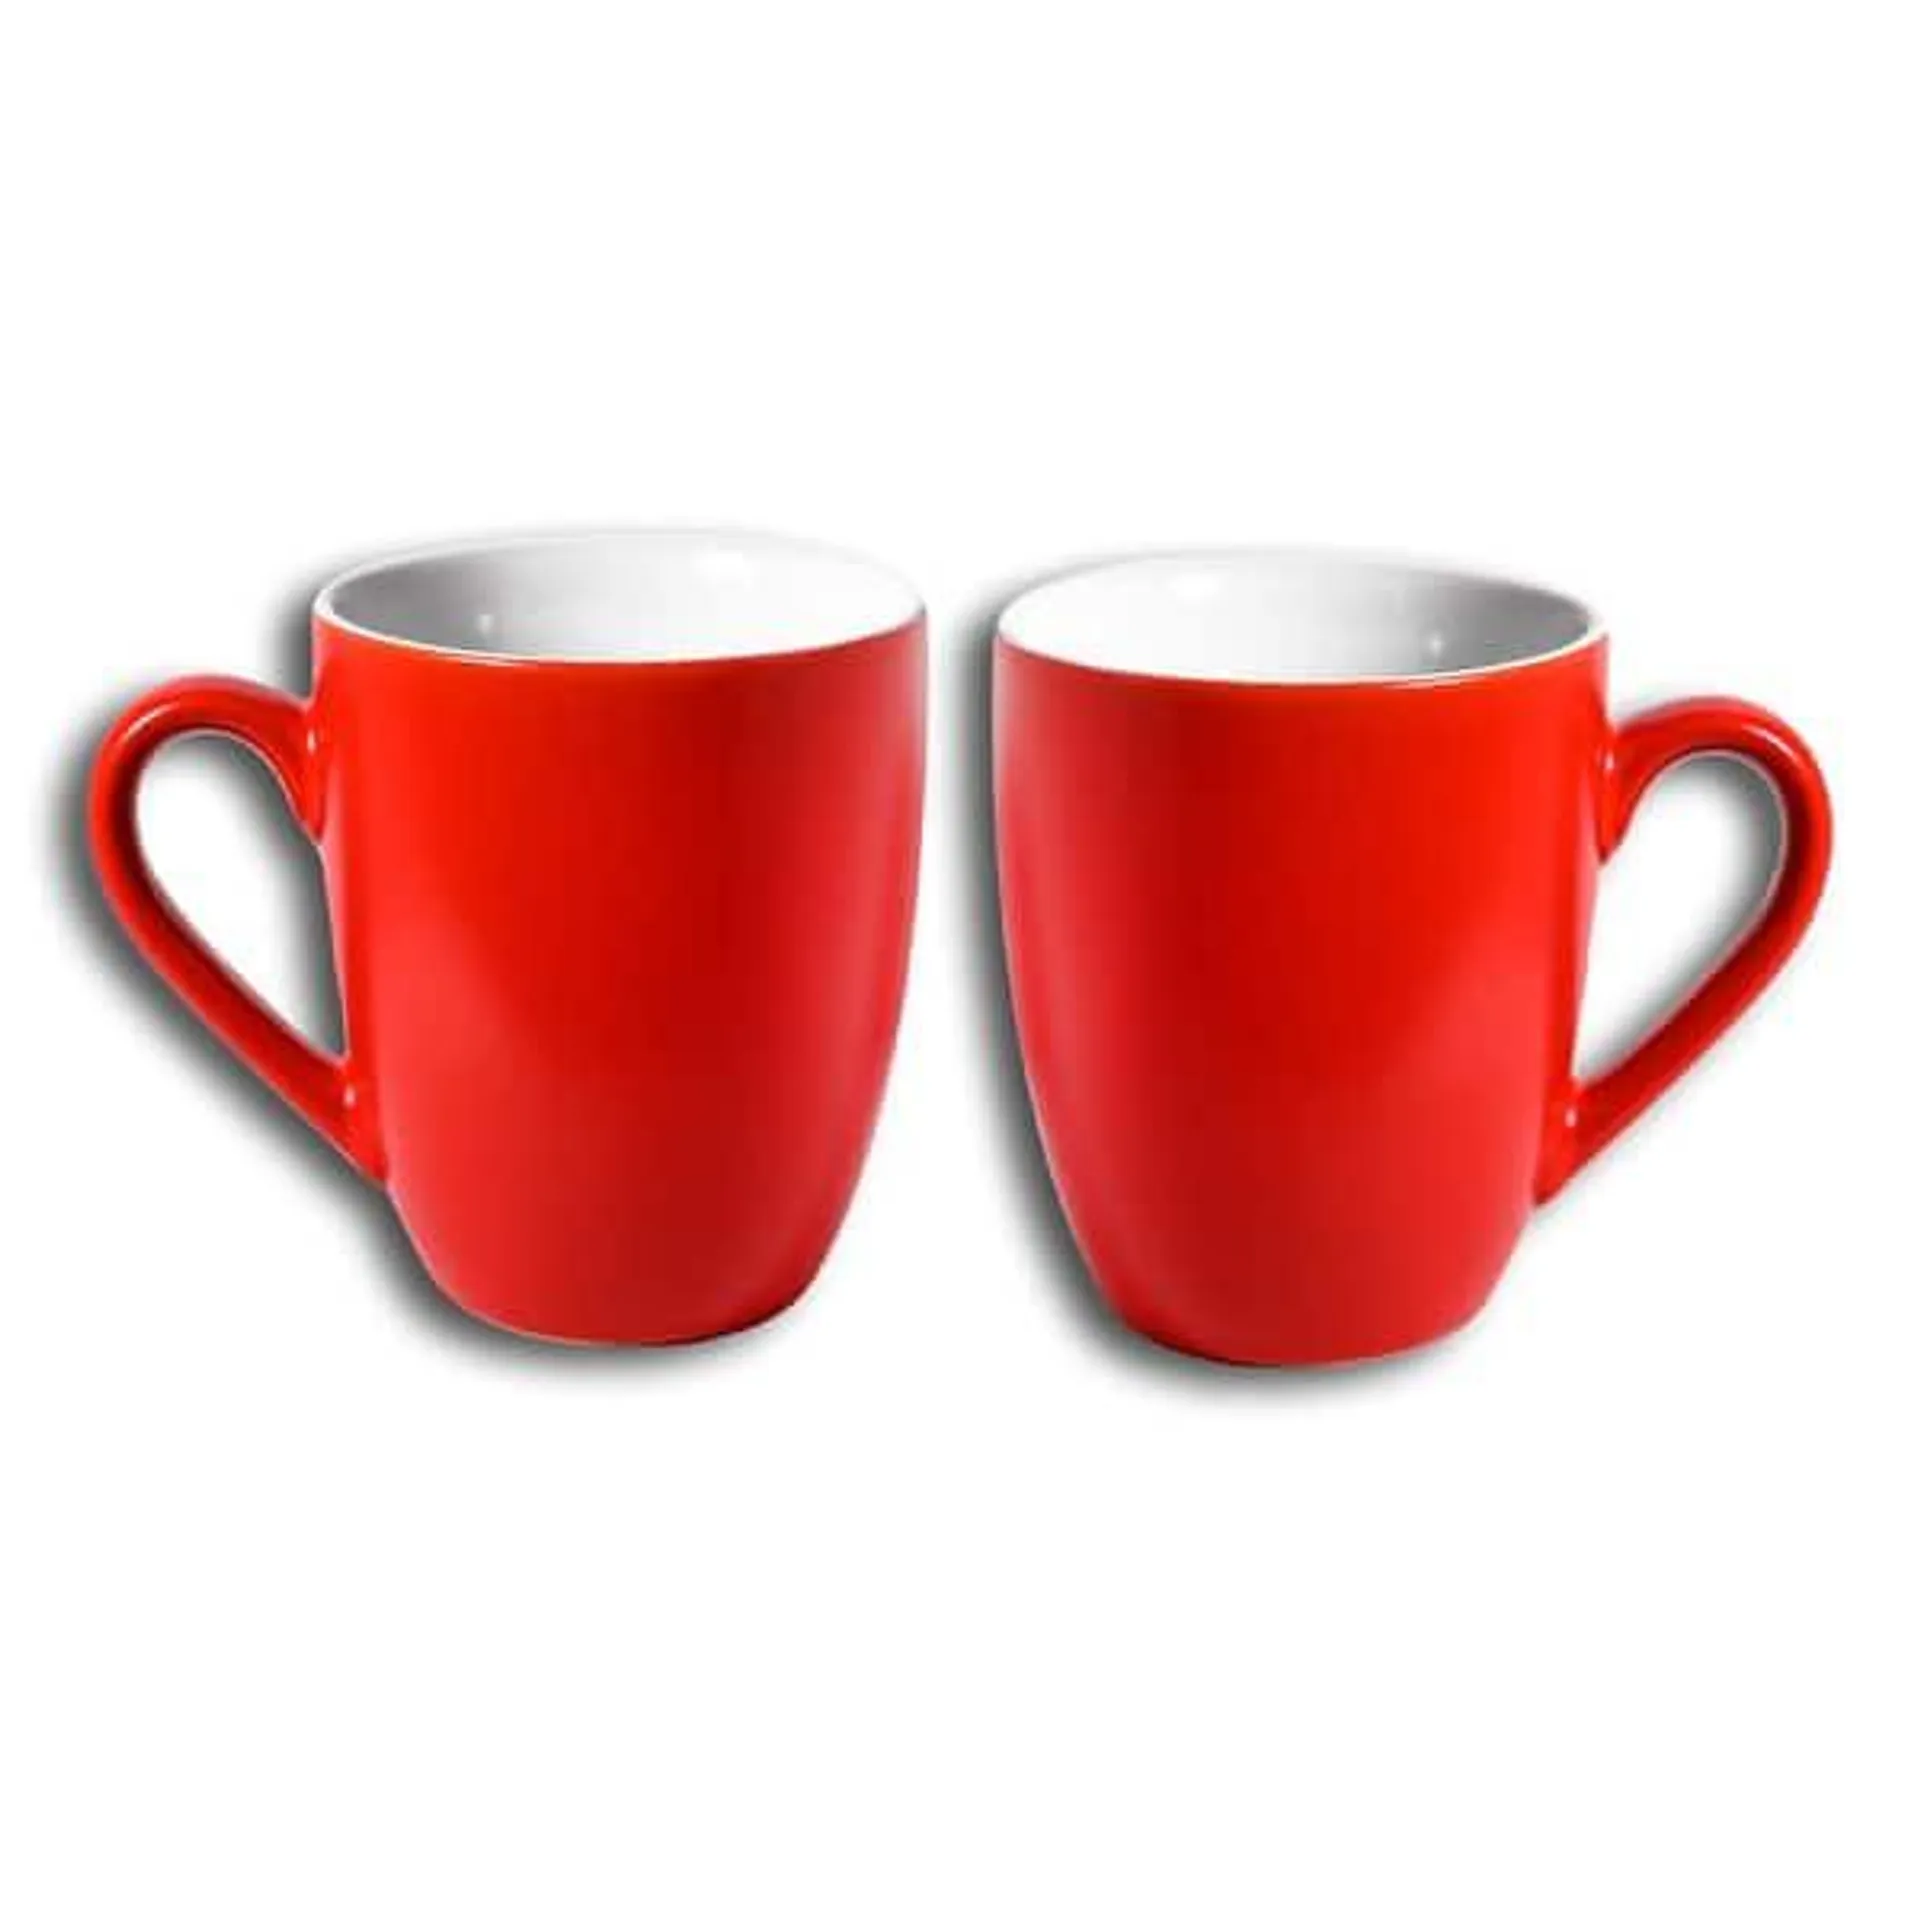 Homvare Coffee Mug, Tea Cup for Office and Home Suitable for Both Hot and Cold Beverage - Red - one size